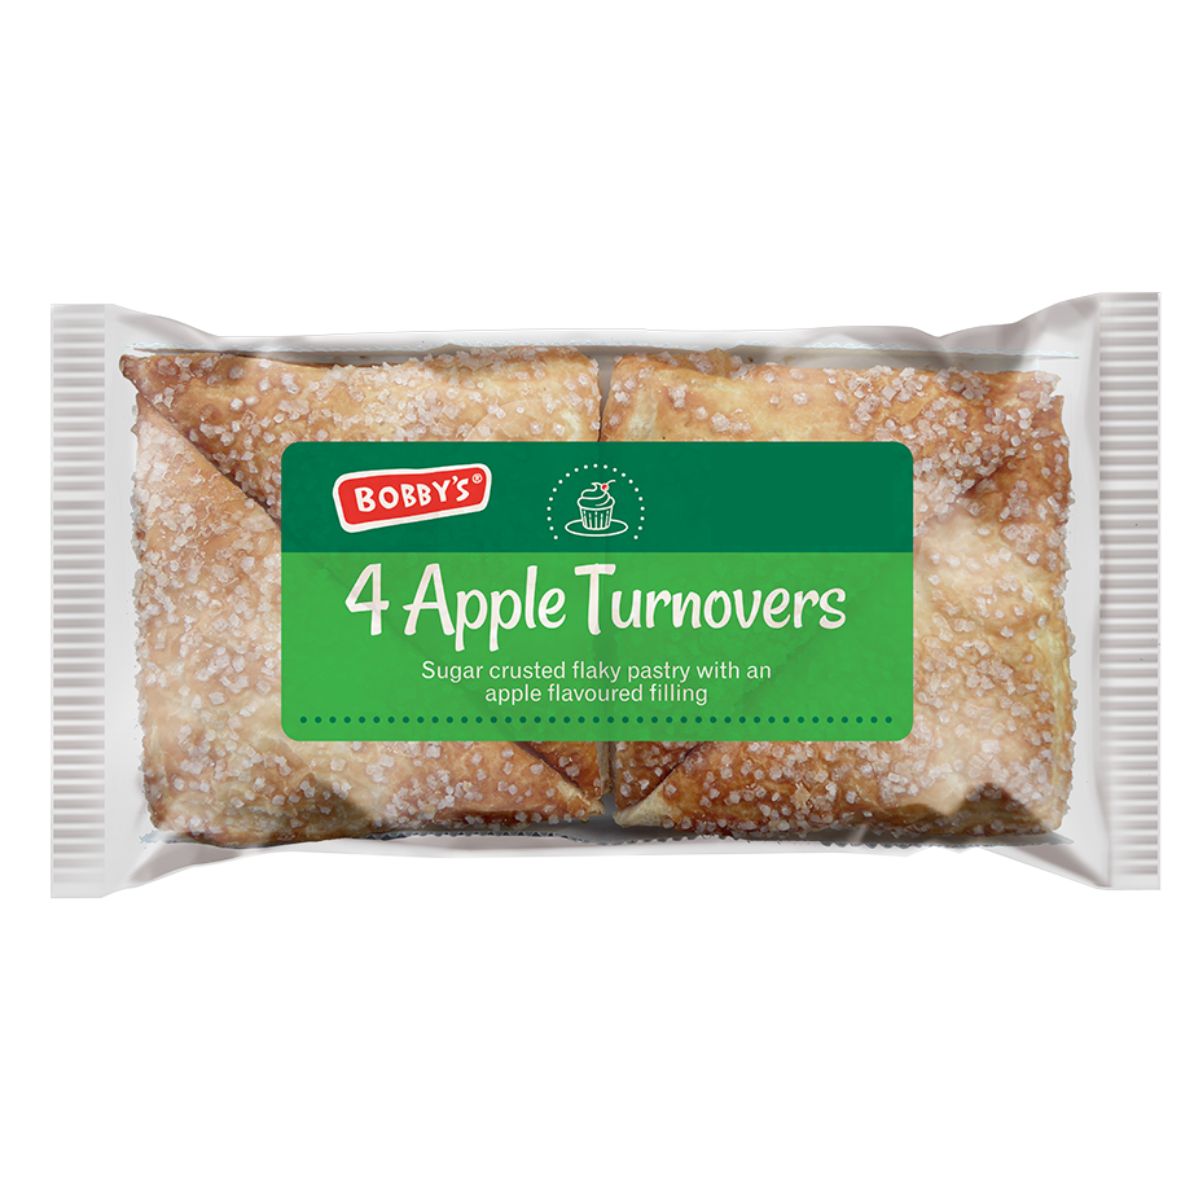 Bobbys - Apple Turnover - 4pcs with sugar crust in a clear plastic wrapping.